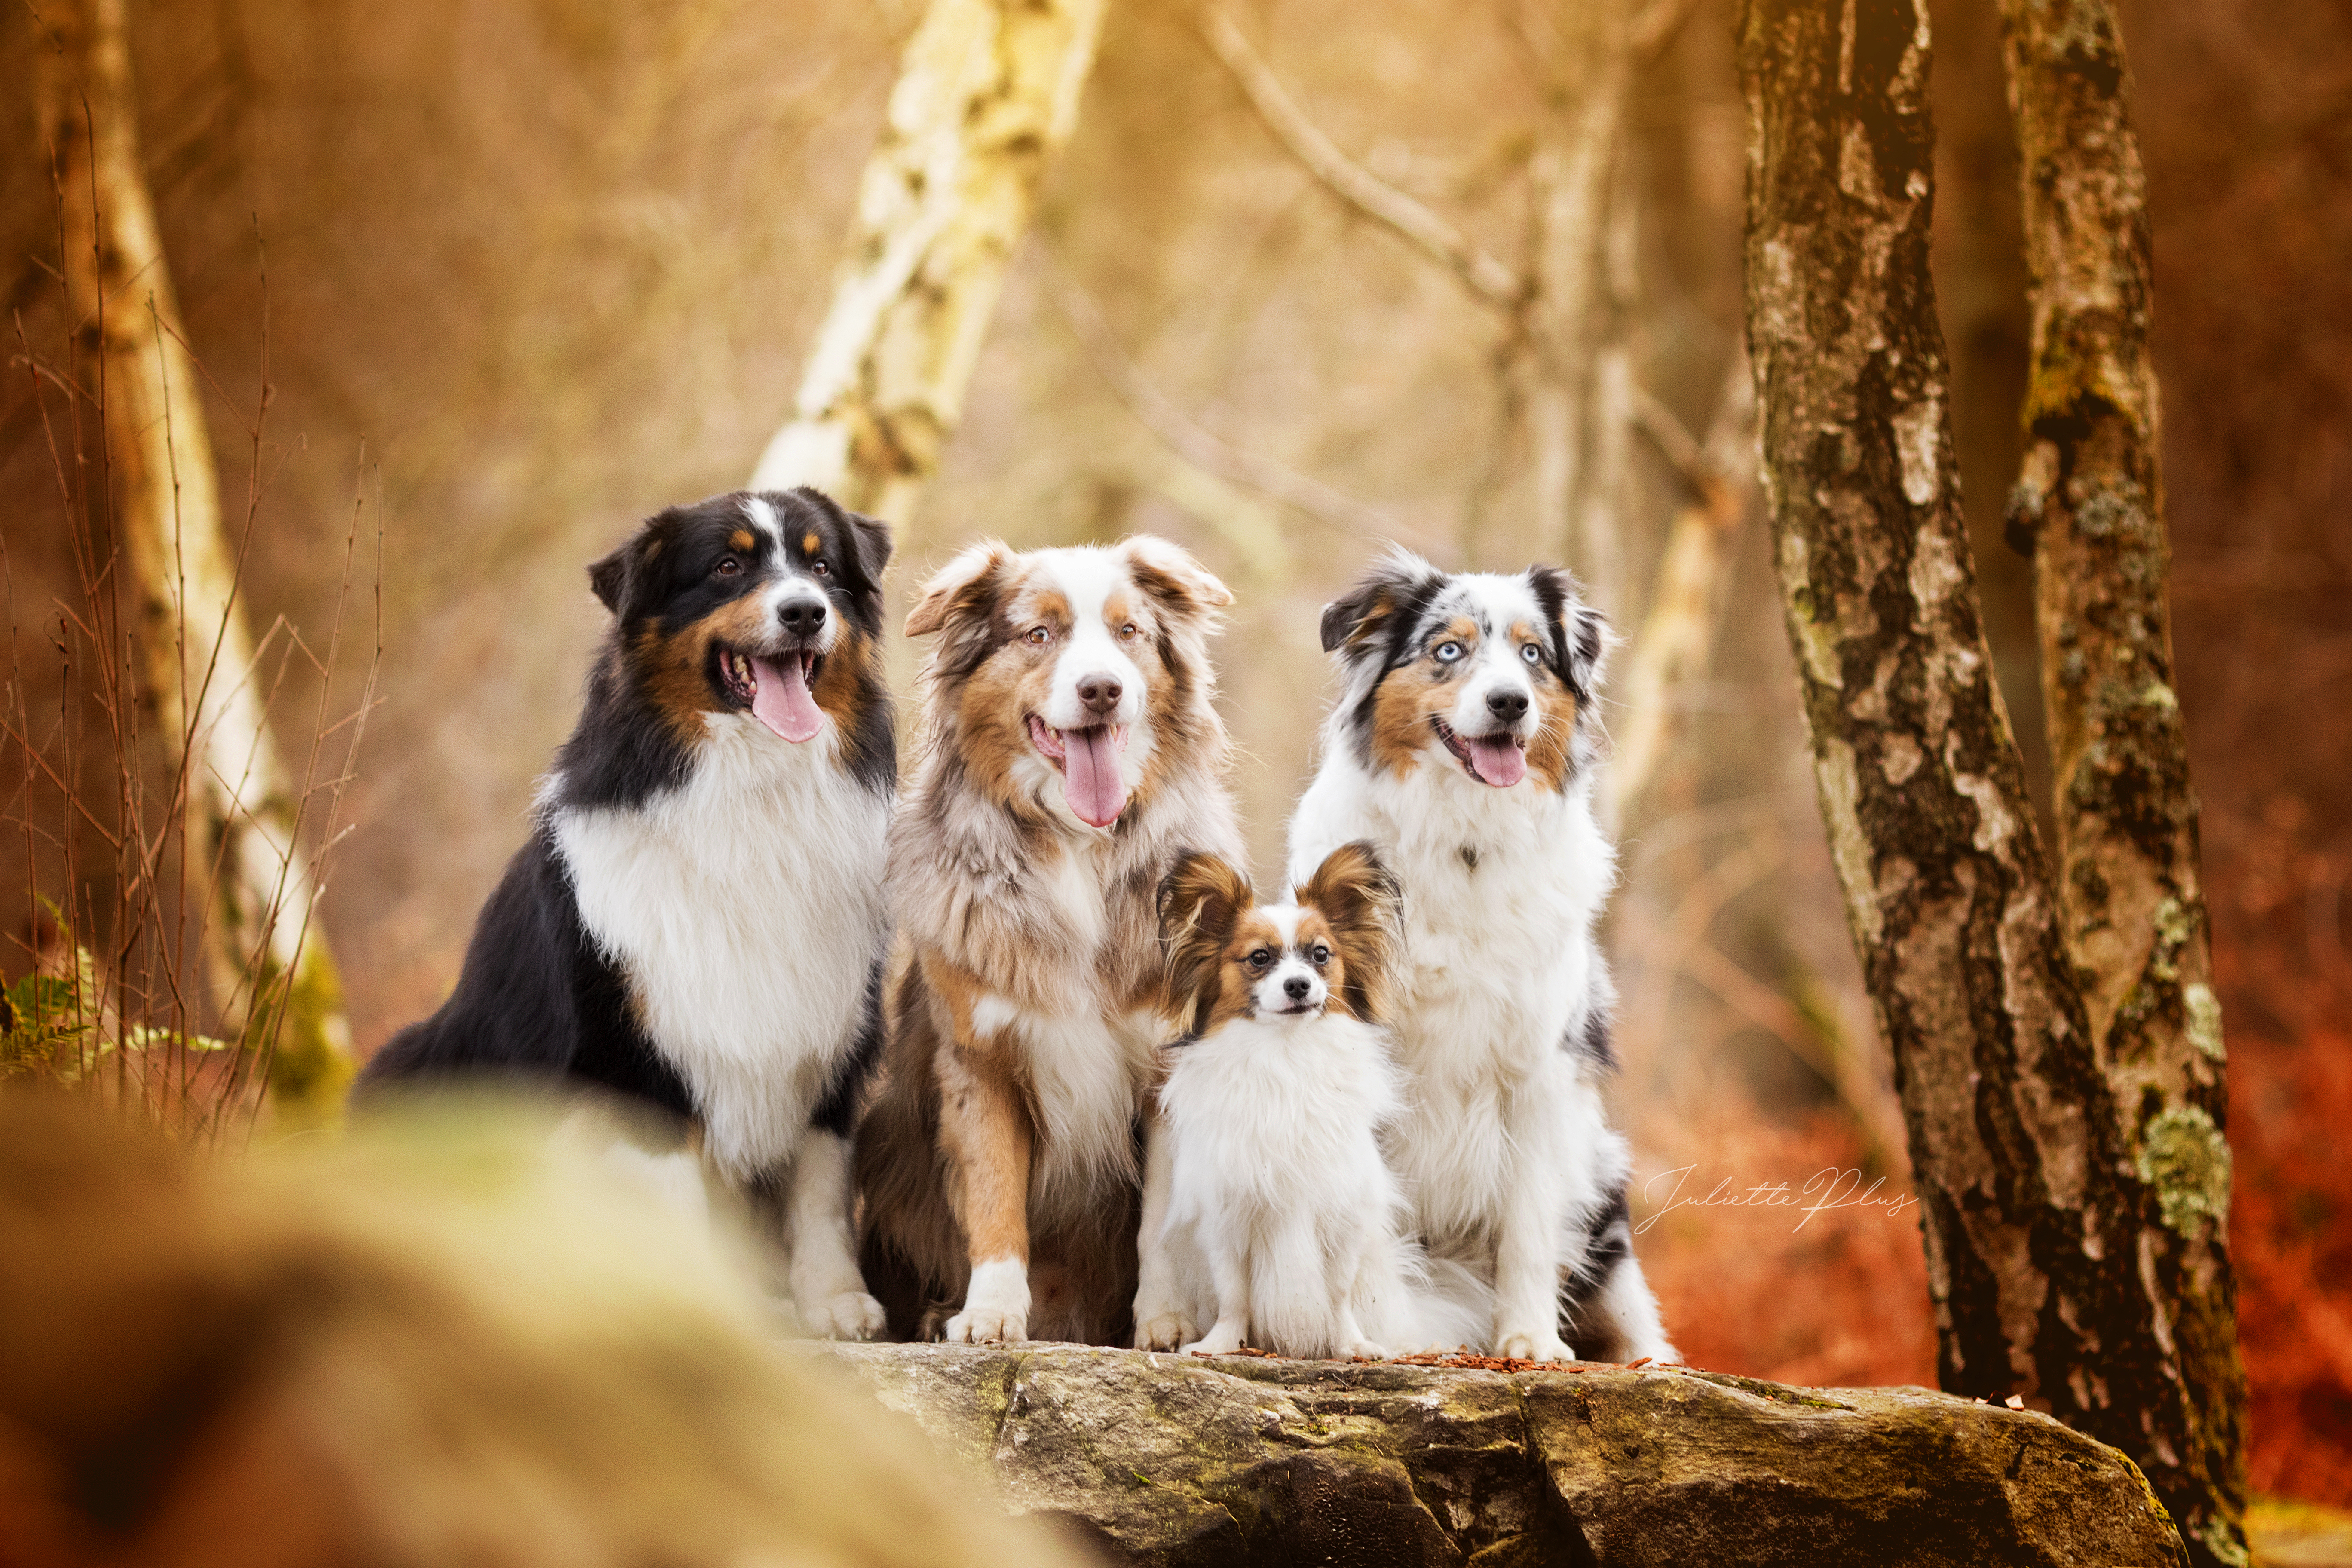 Dogs in the Forest by Juliette Plus